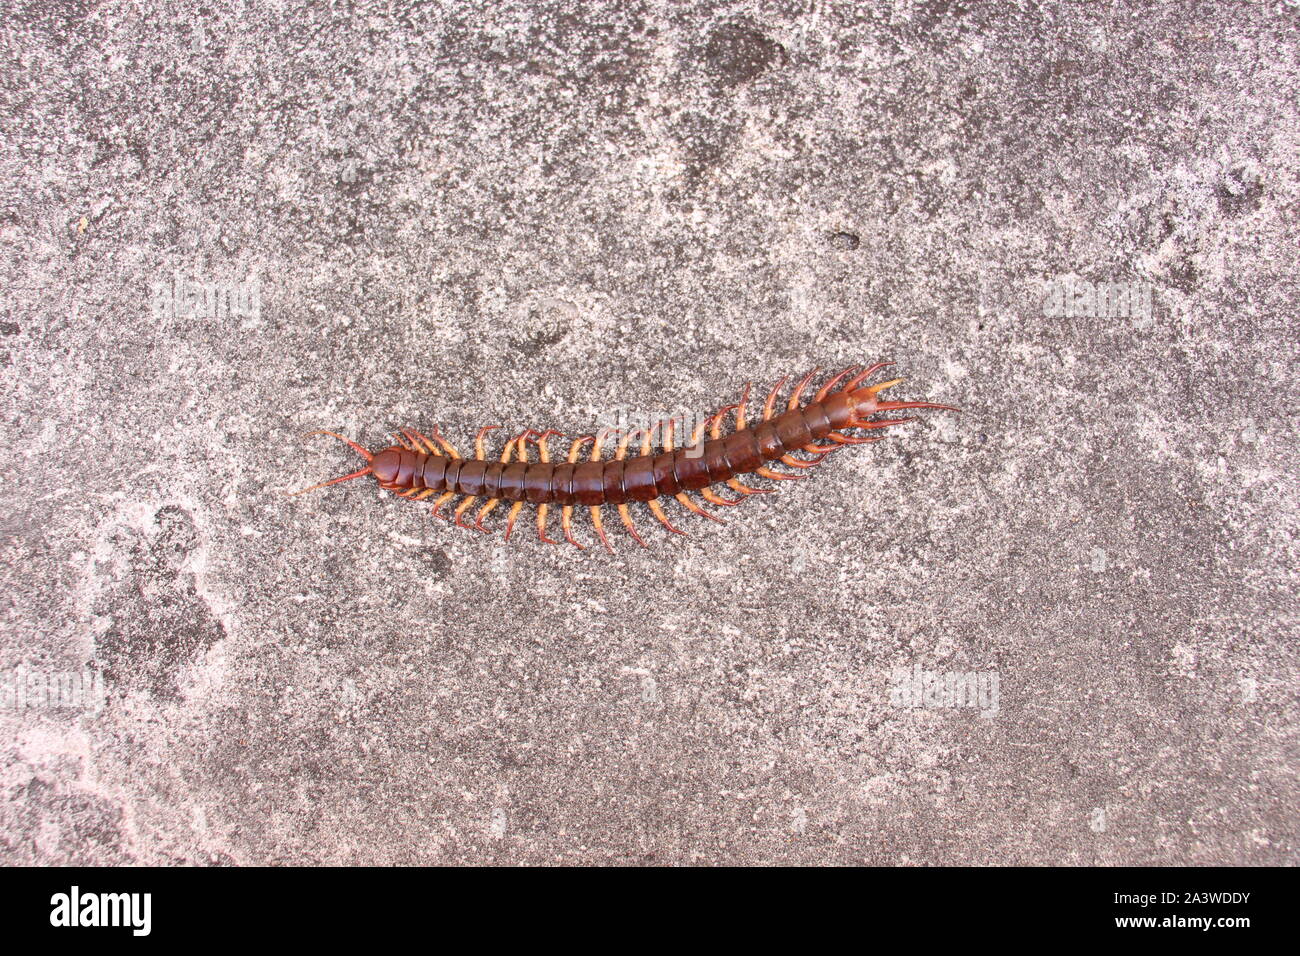 Chinese Red Headed Centipede. Asian Forest Centipede in Thailand. Stock Photo